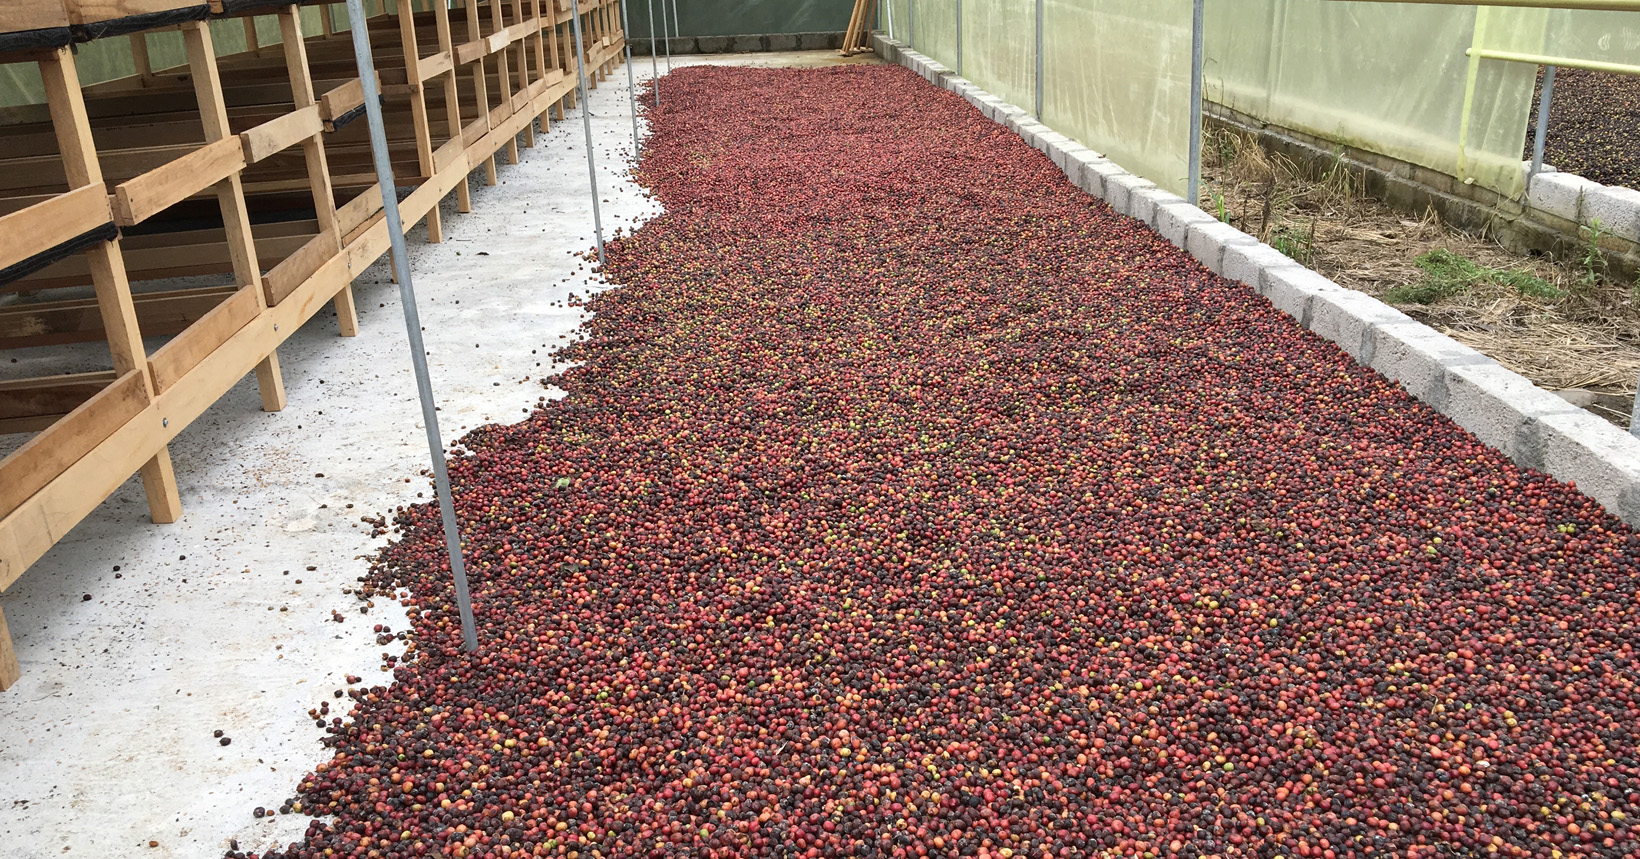 Coffee cherries sitting in tents to dry.